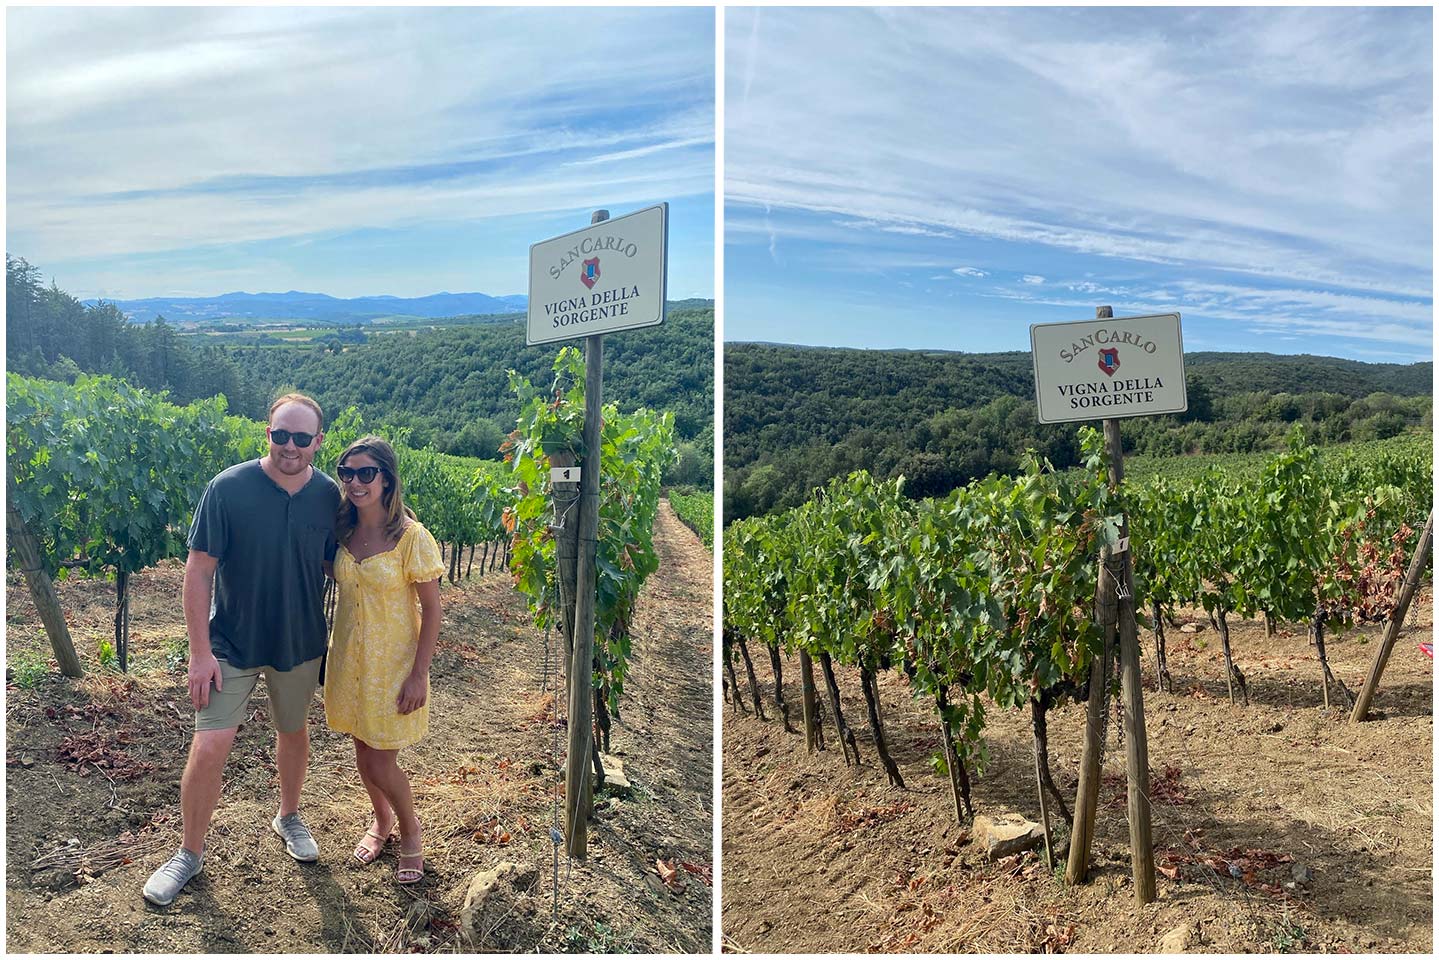 Erica from USA, September 2021 - Hi Gemma, can't wait to drink some San Carlo here and share with some great friends and family. We had the most amazing time at the winery last month and will be sure to visit again soon. :-)